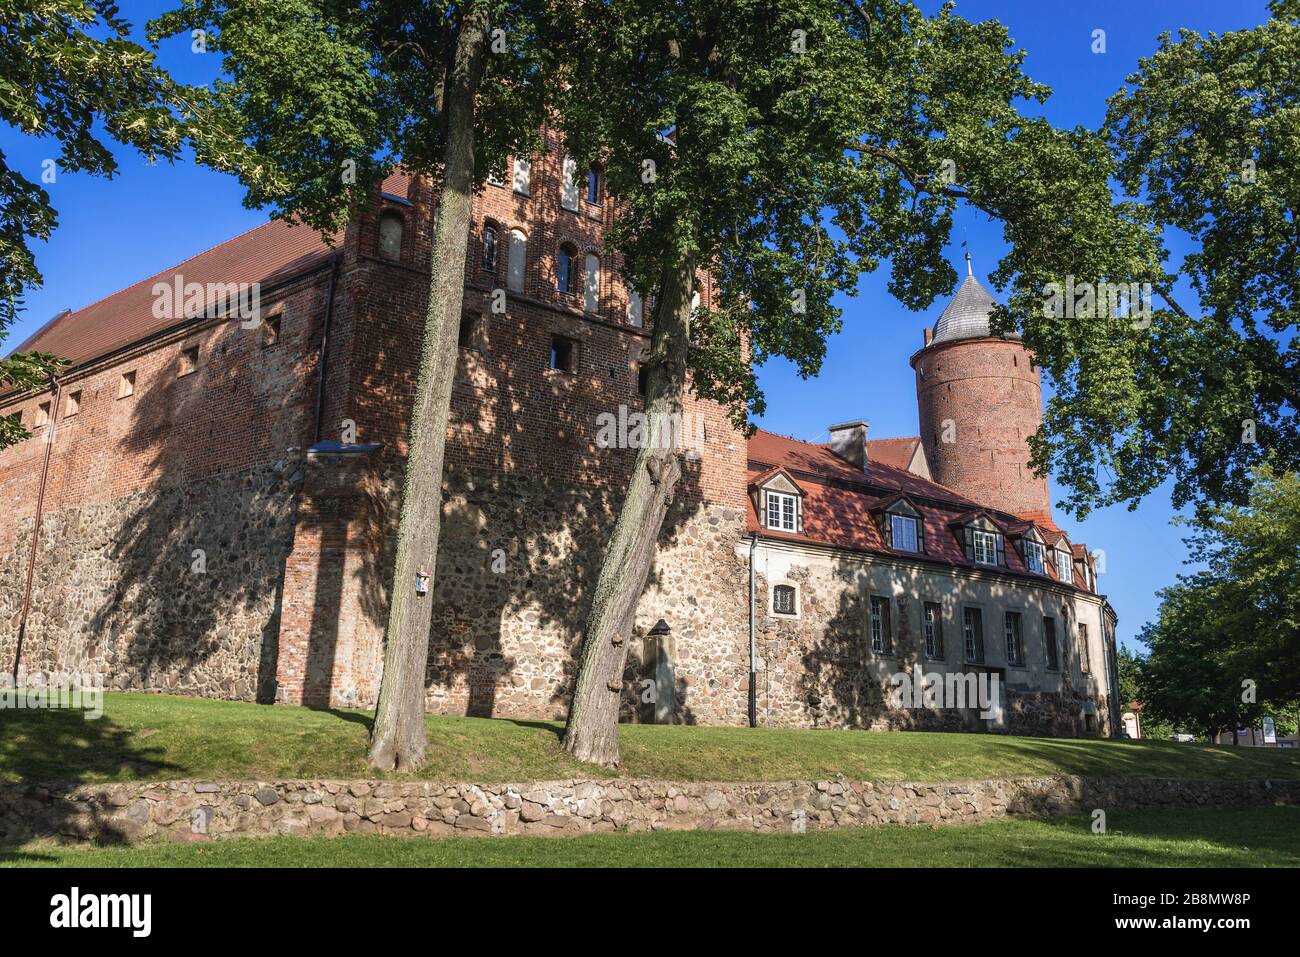 Medieval knights castle in Swidwin, capital of Swidwin County in West Pomeranian Voivodeship of northwestern Poland Stock Photo